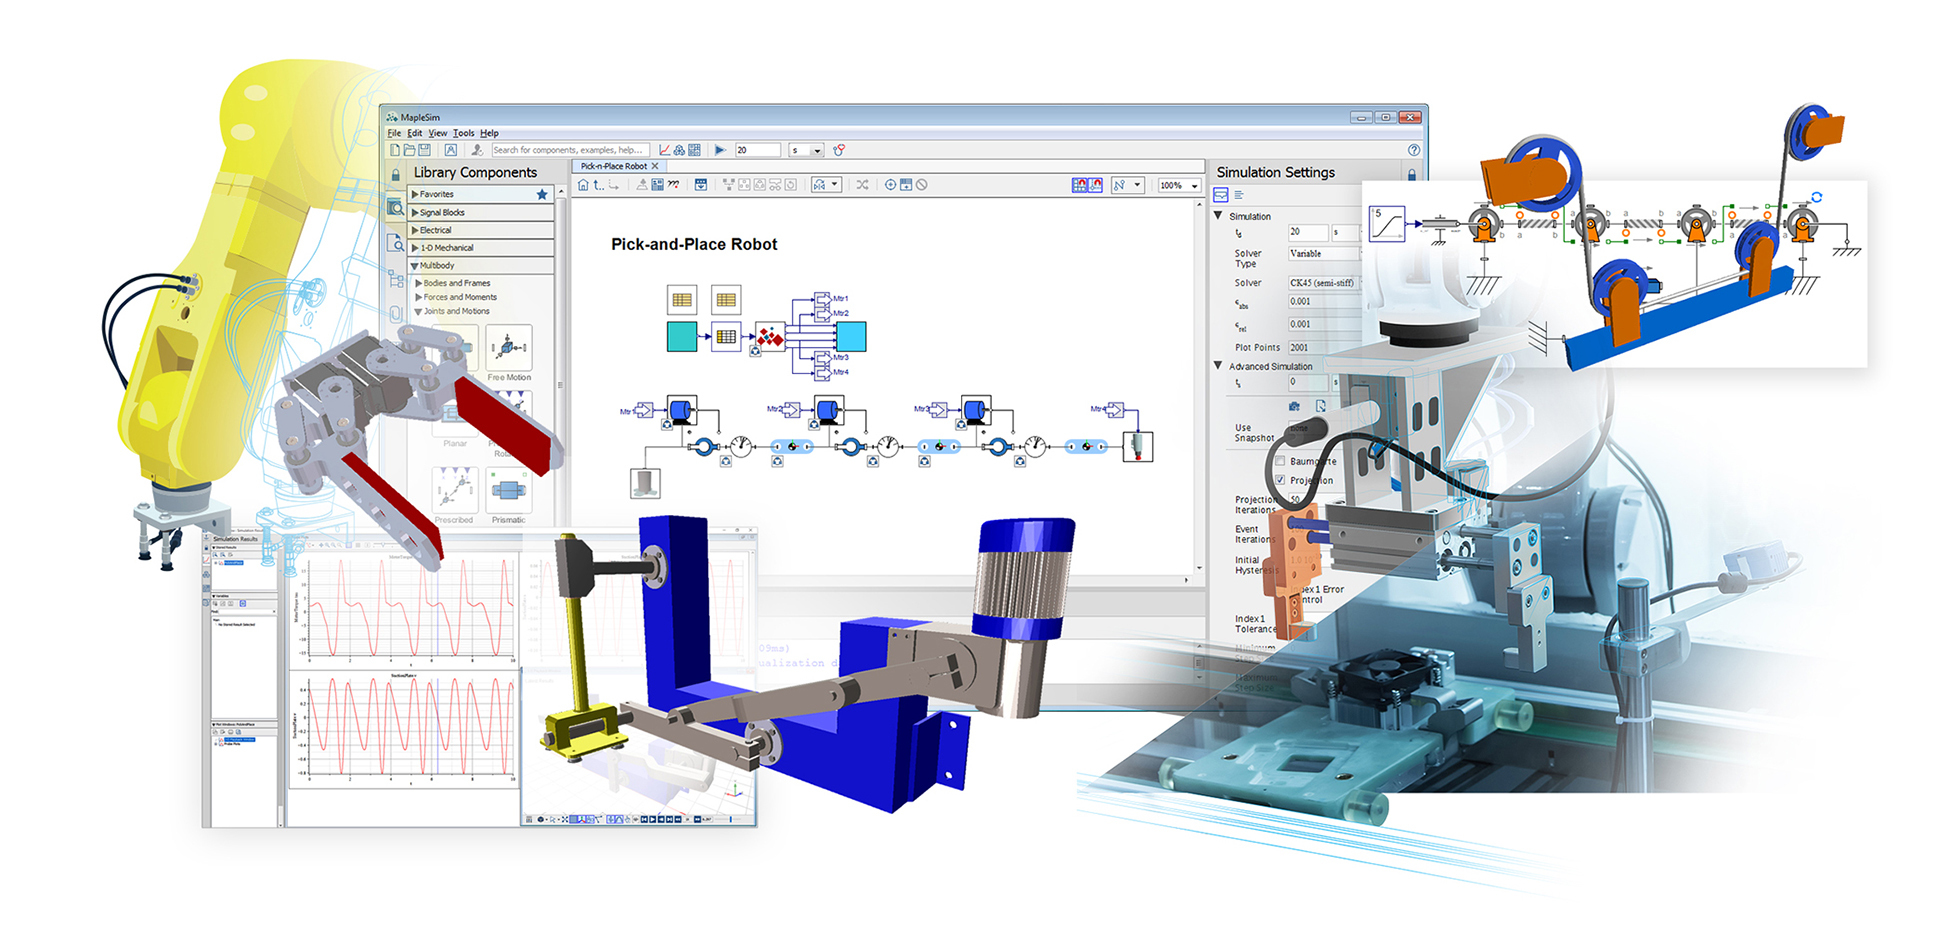 Maplesoft is now offering turnkey solutions for creating digital twins and implementing virtual commissioning, by using new features in MapleSim and MapleSim Insight to give even non-experts the ability to benefit from these simulation-based technologies.